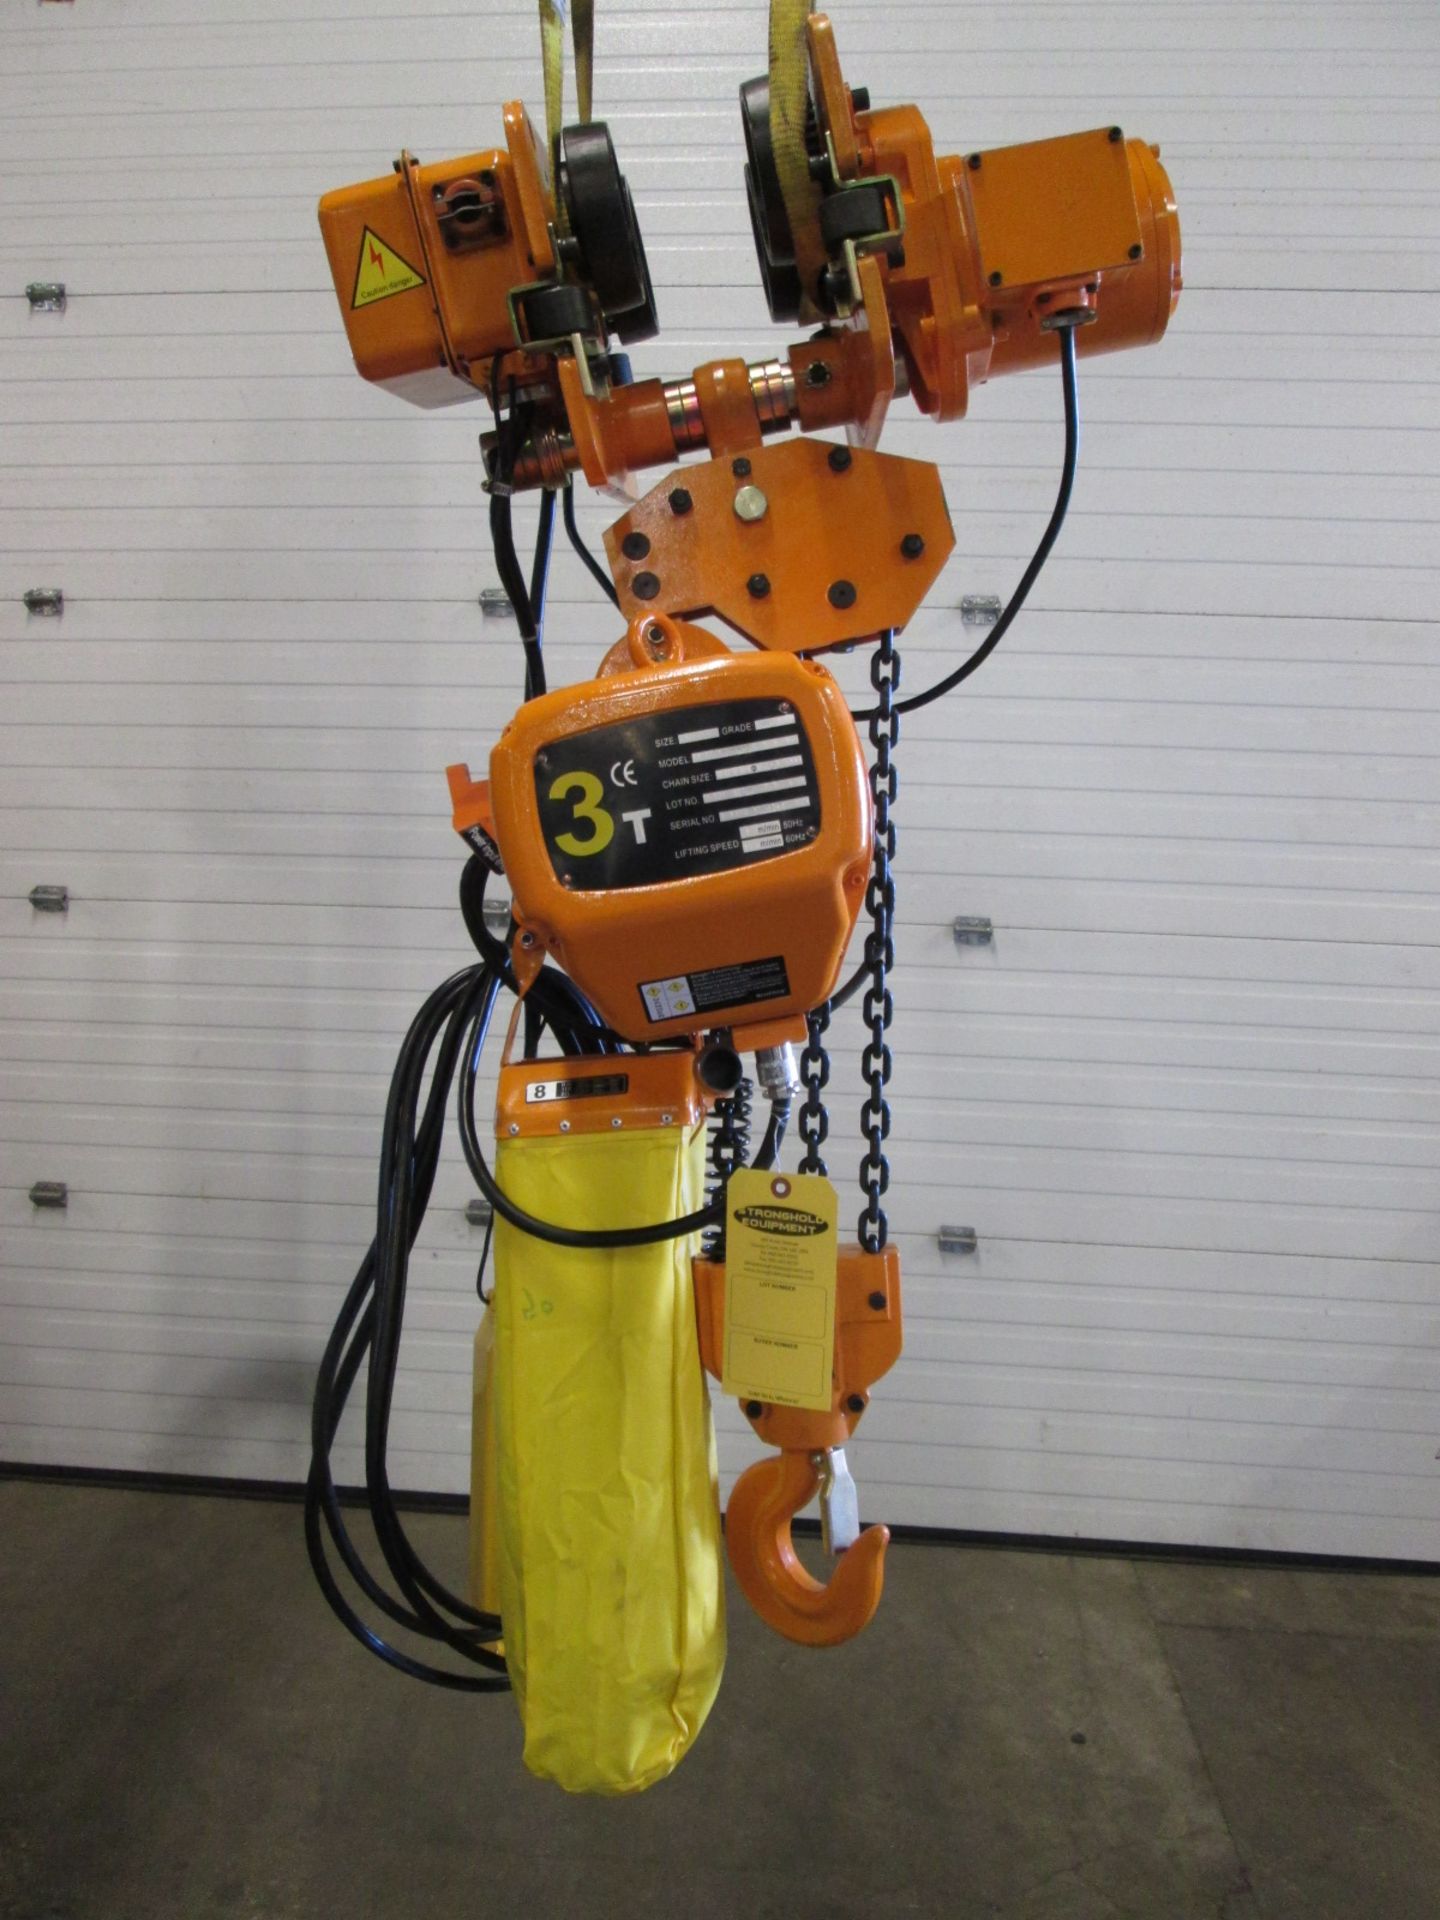 RW 3 Ton Electric chain hoist with power trolley and 8 button pendant controller - 220V - 20 foot